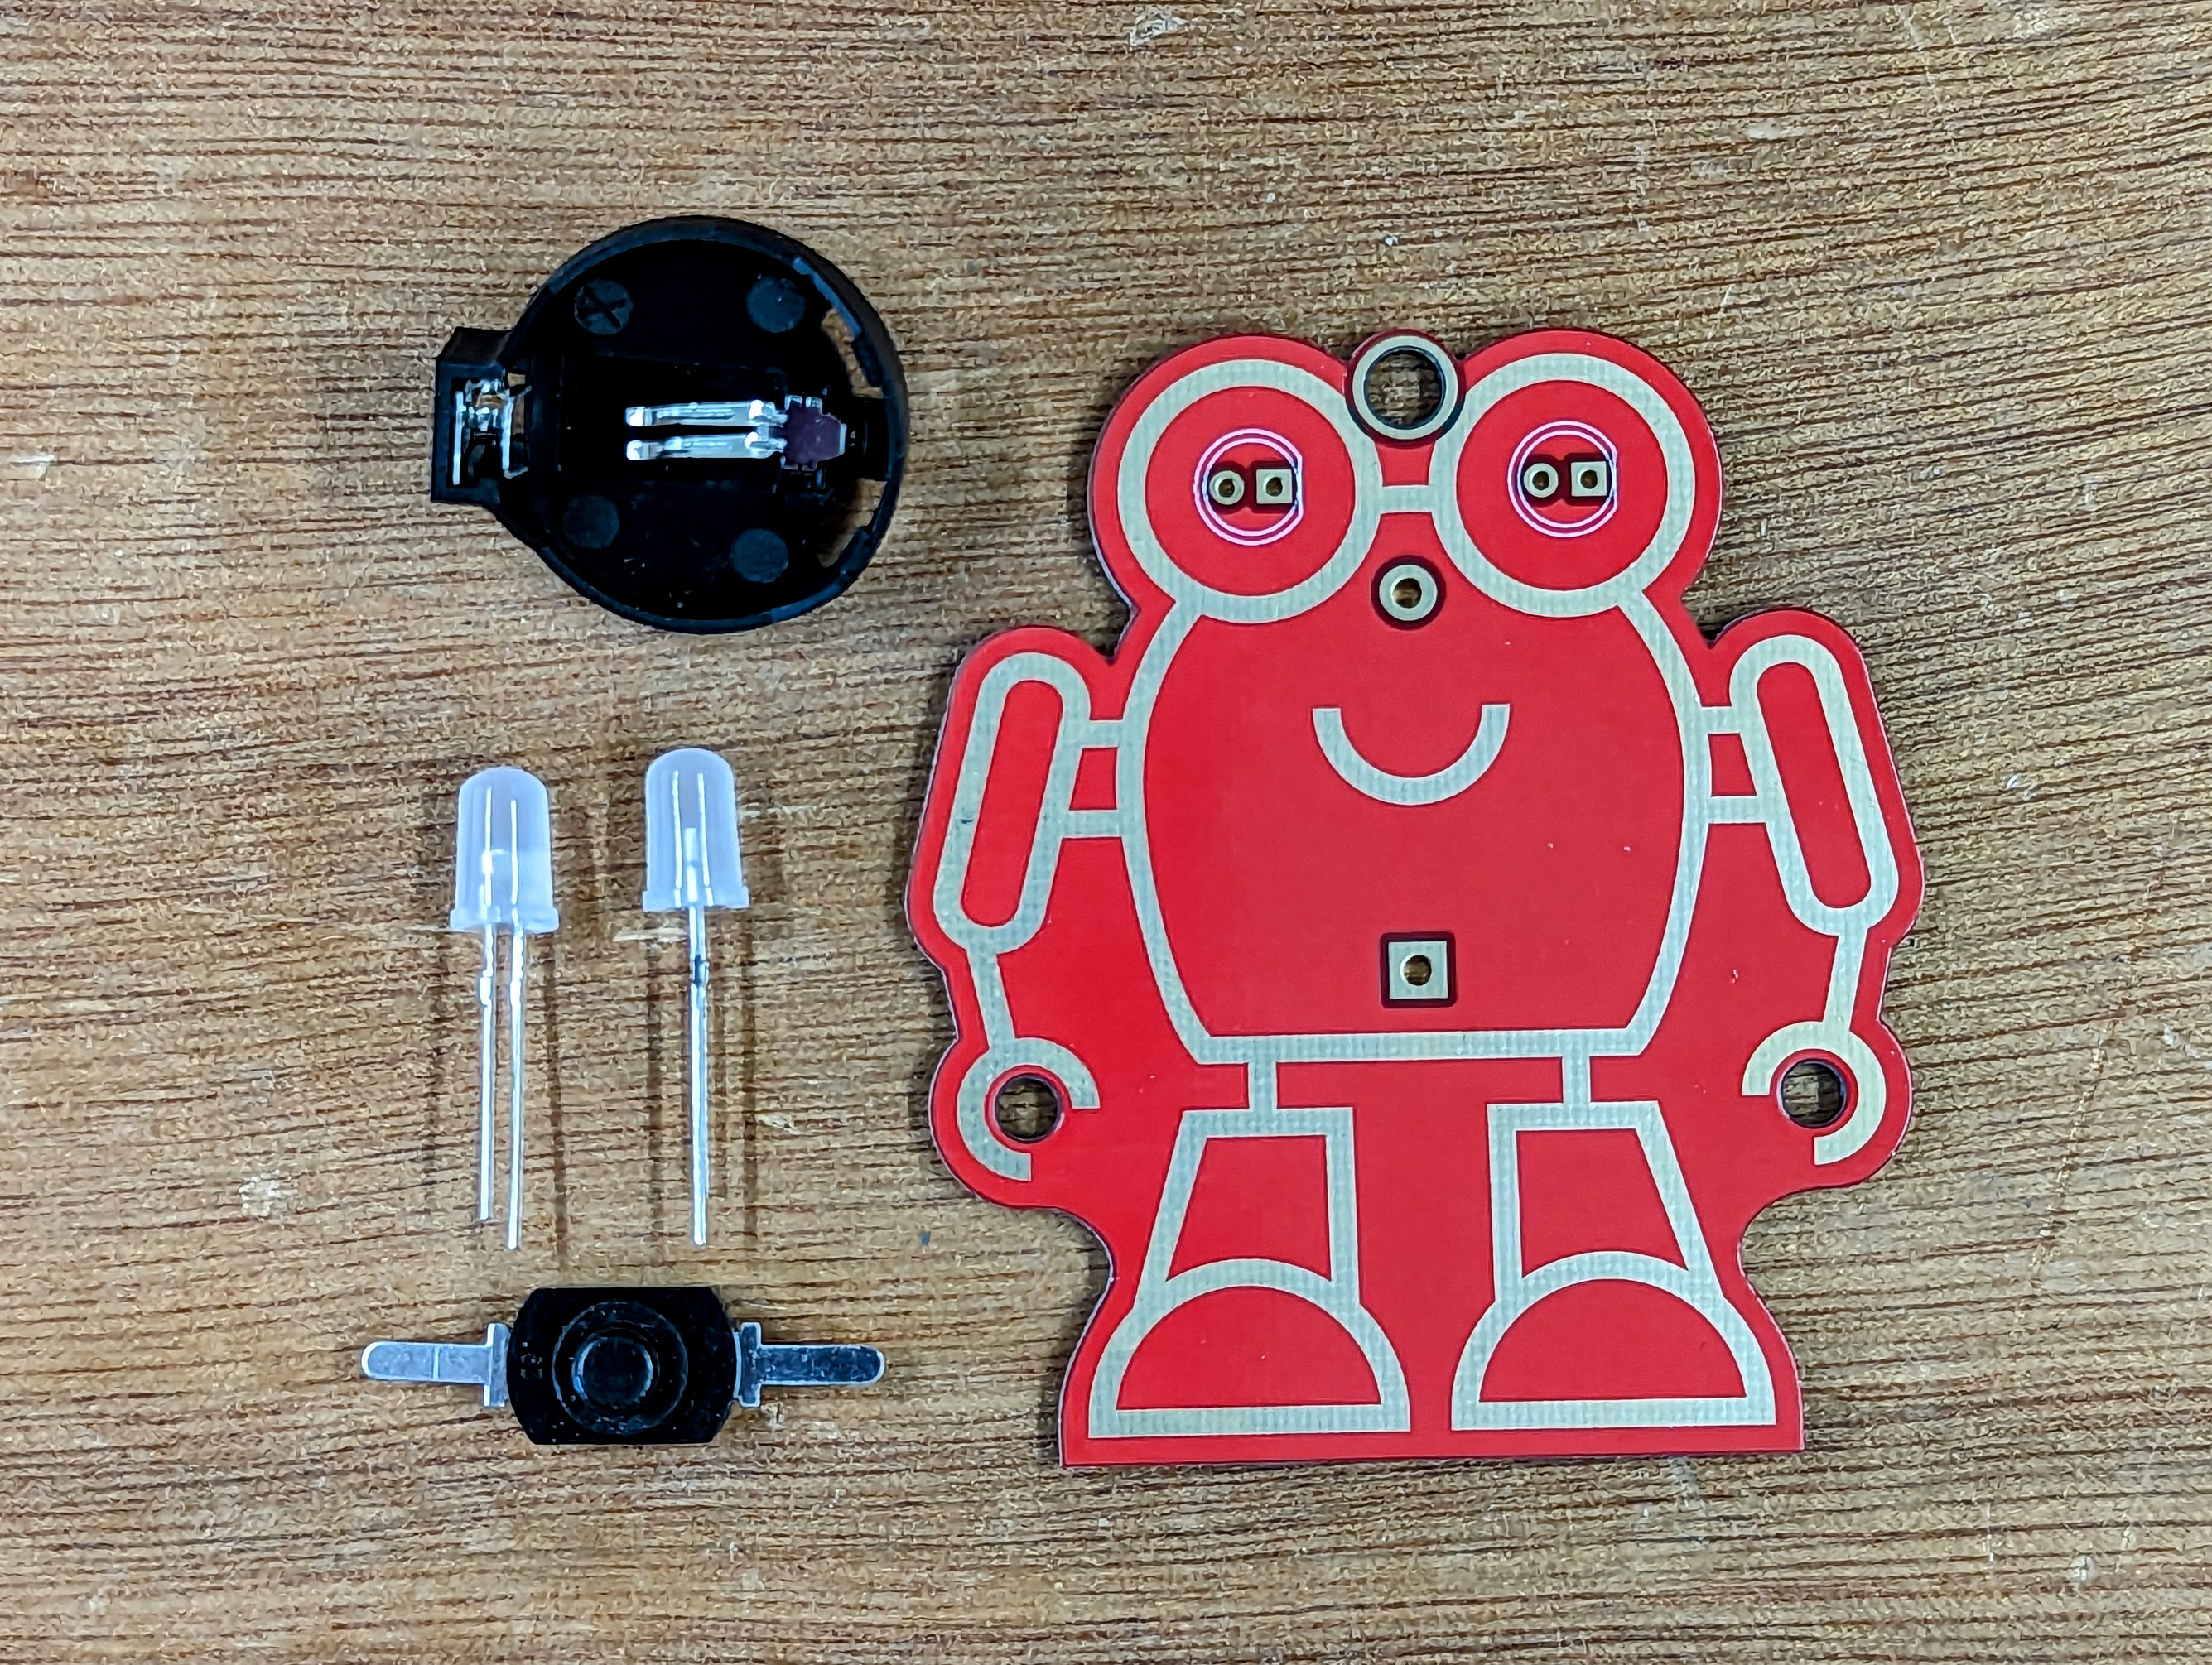 Robo Robin soldering kit - The very simple and funny red robot kit